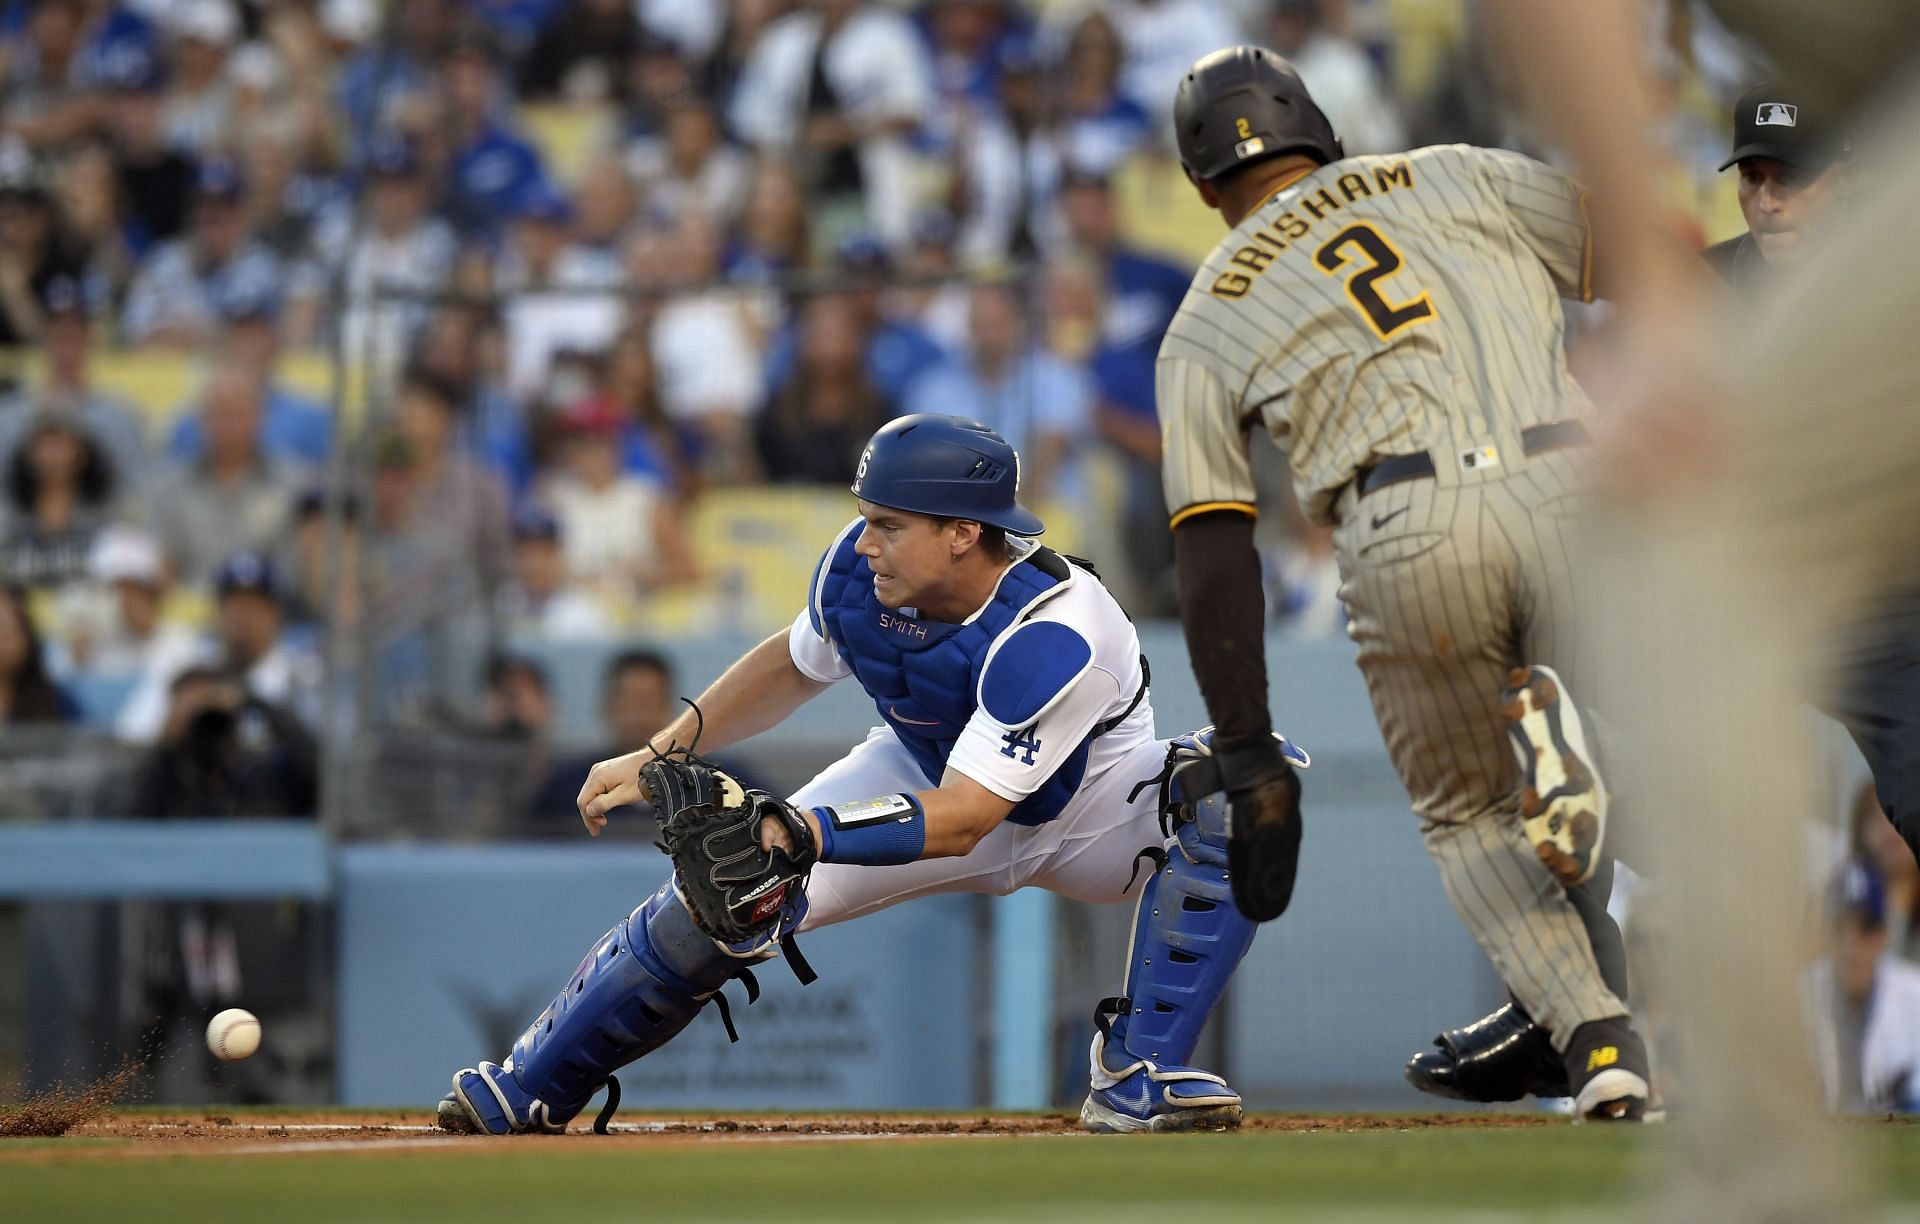 Only two catchers have outperformed LA Dodgers backstop Will Smith this term.